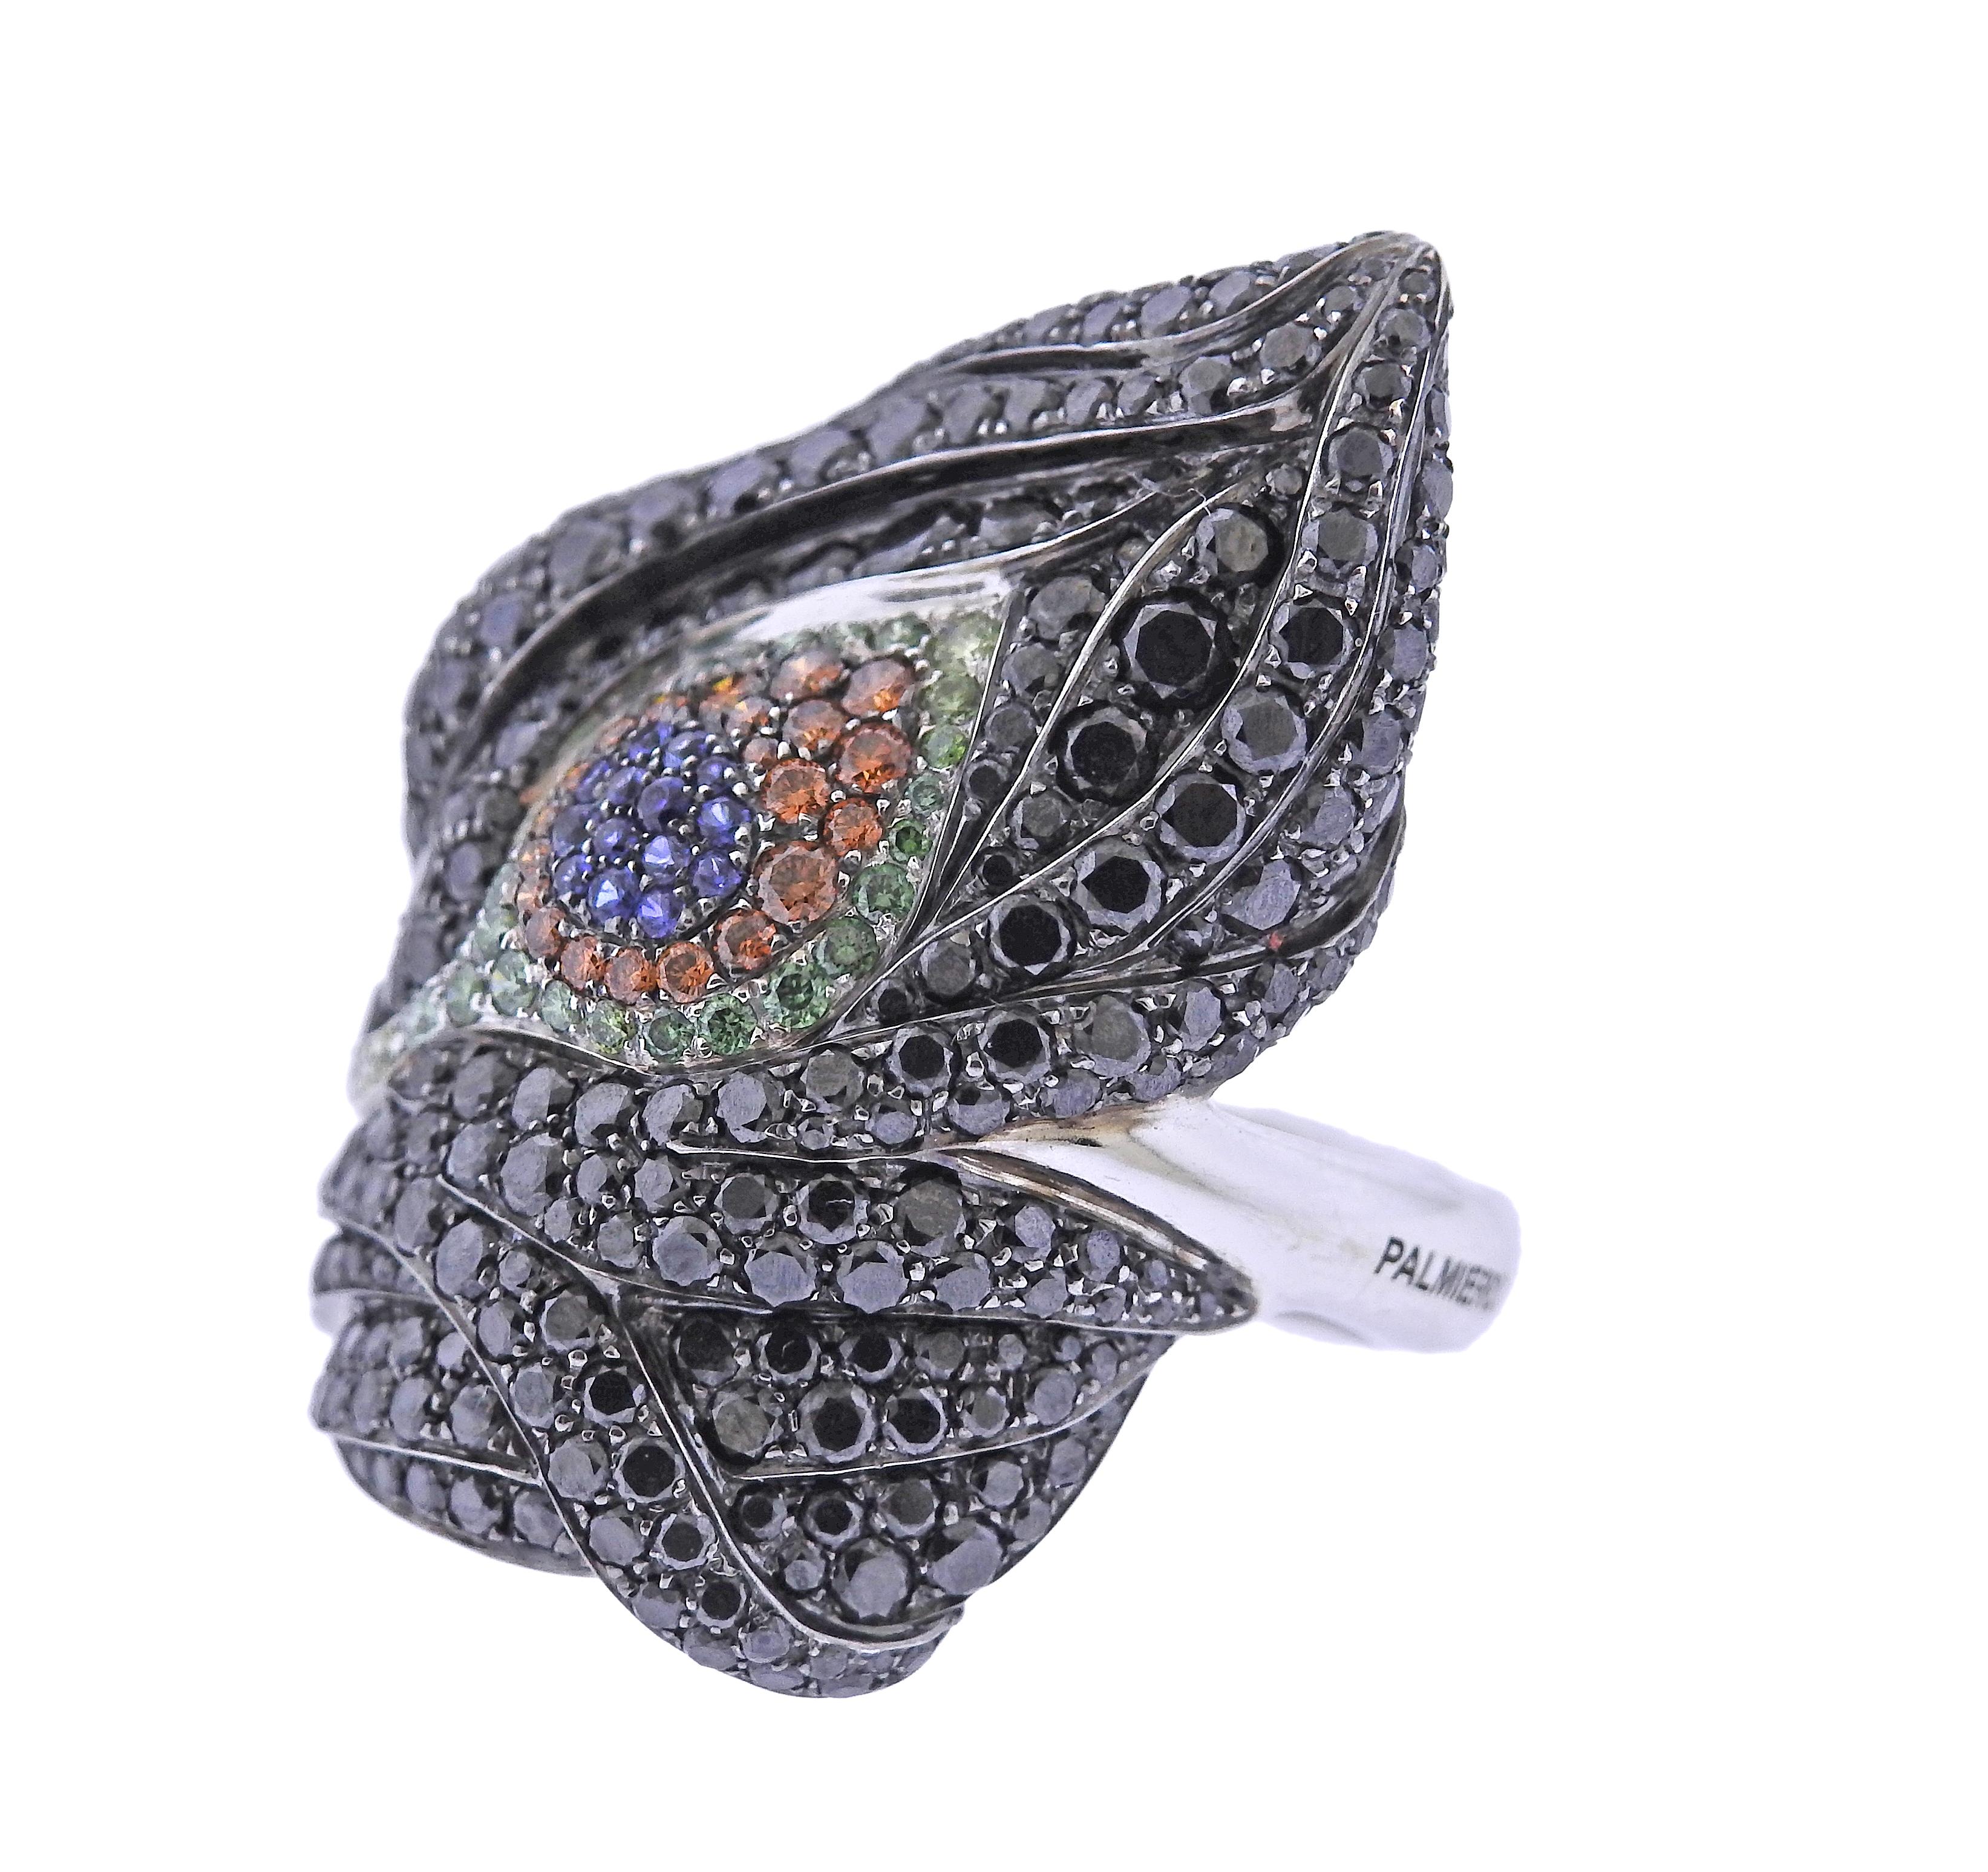 Impressive 18k gold cocktail ring by Palmiero, featuring a peacock feather, set with black & white diamonds, as well as multi color sapphires in the center. Ring size - 7.25, ring top - 35mm wide. Marked Palmiero, 750. Weight - 20.6 grams. 